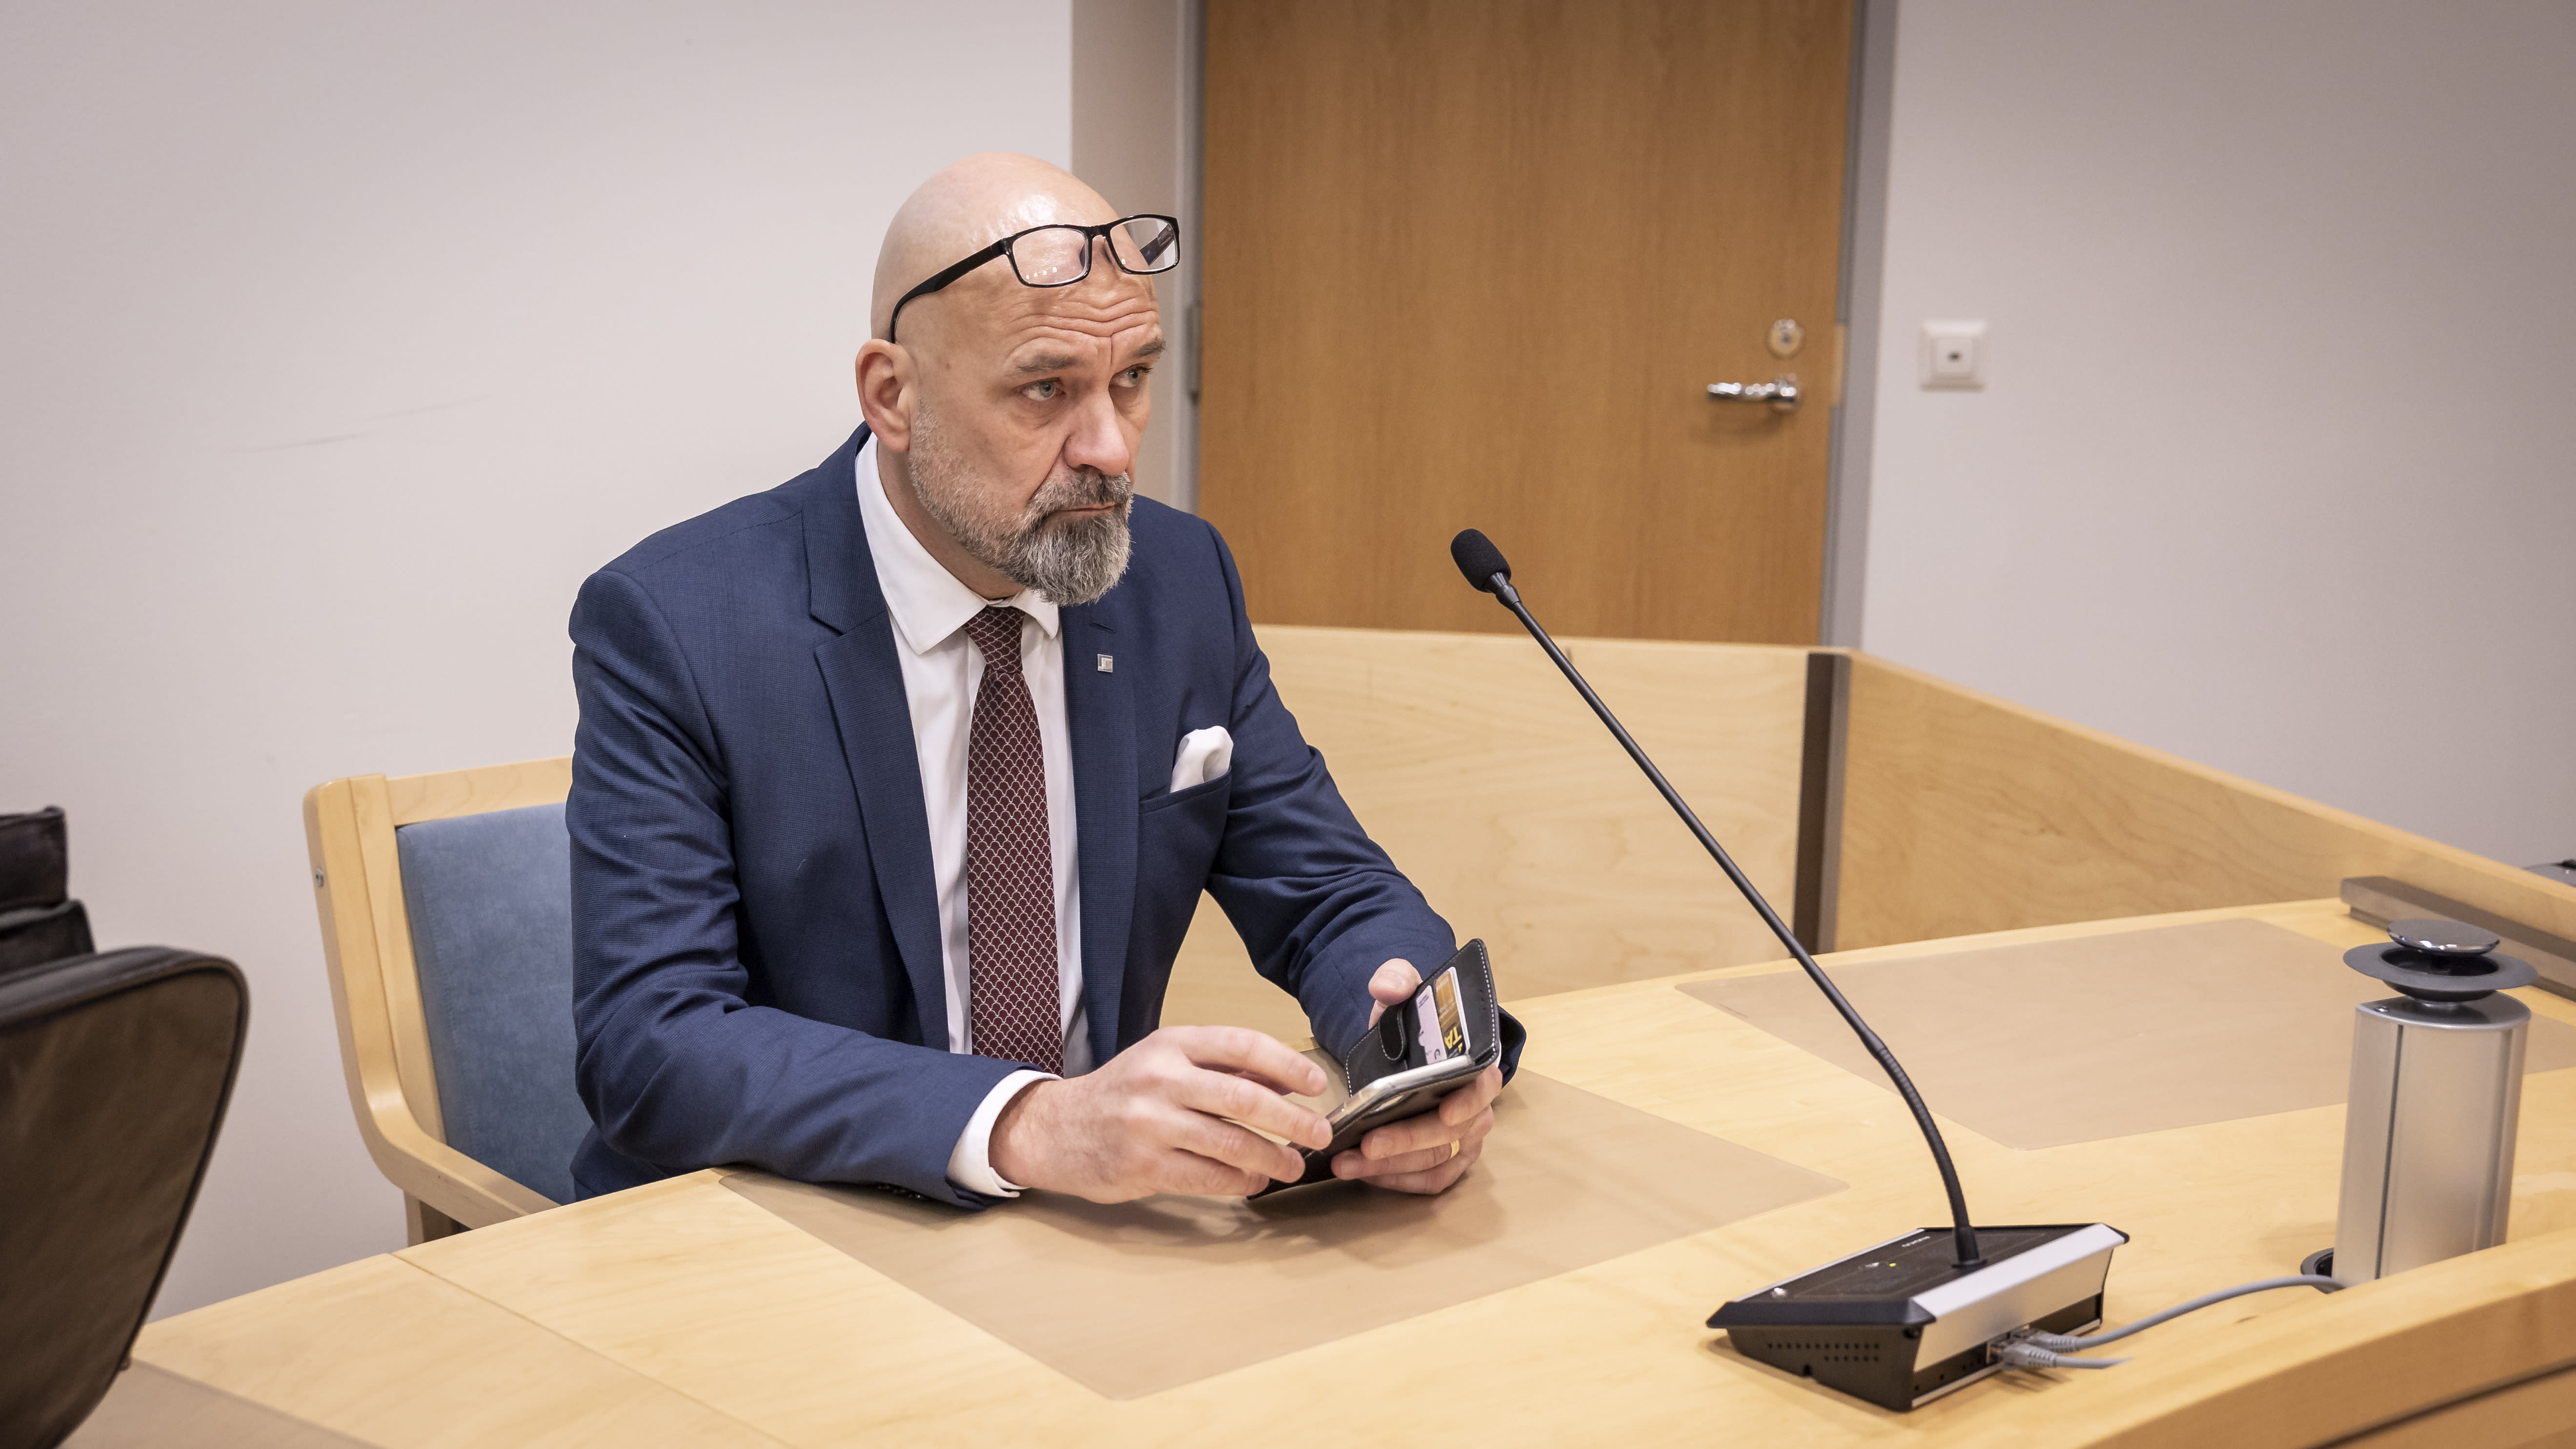 Basic Finnish MP convicted of incitement and faced severe fines